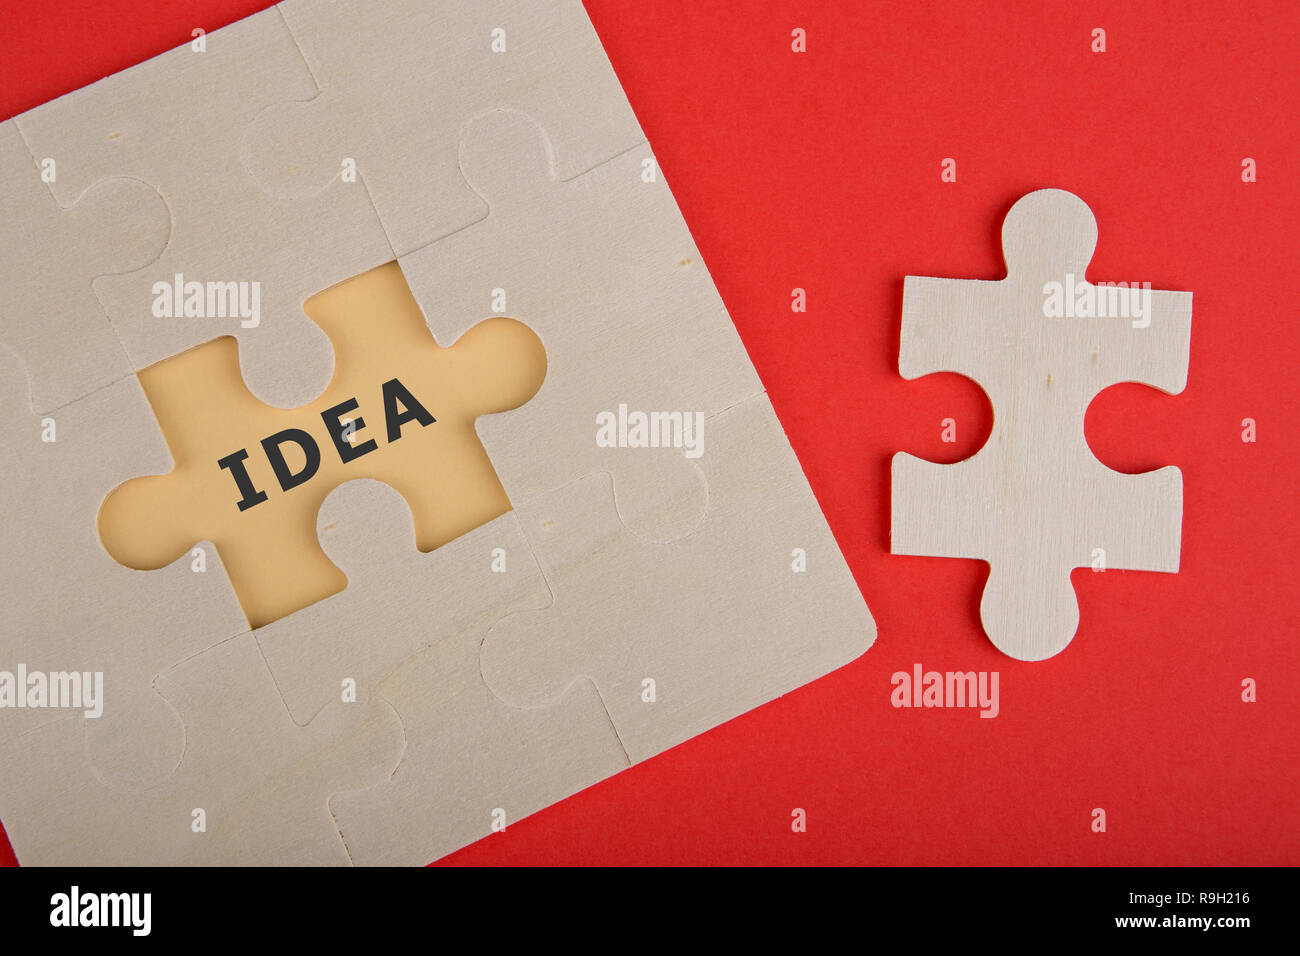 Business Teamwork Concept - Jigsaw Puzzle Pieces with text 'IDEA' on red background Stock Photo